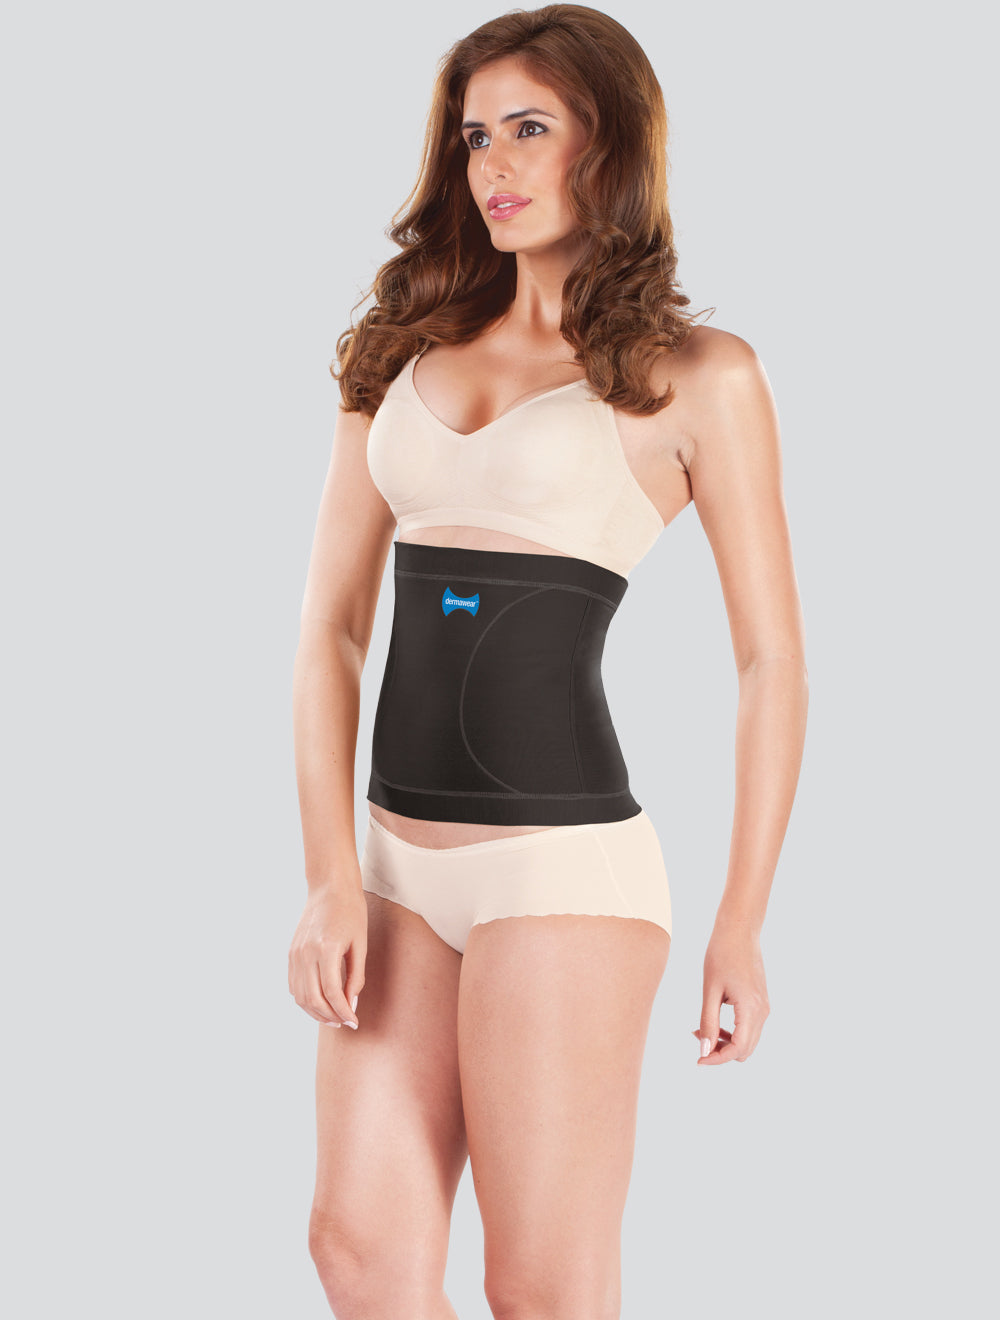 Dermawear Shapewear on Instagram: What makes us special? Well other than  the fact that we are the pioneer in this field and each and every product  of ours is especially designed keeping